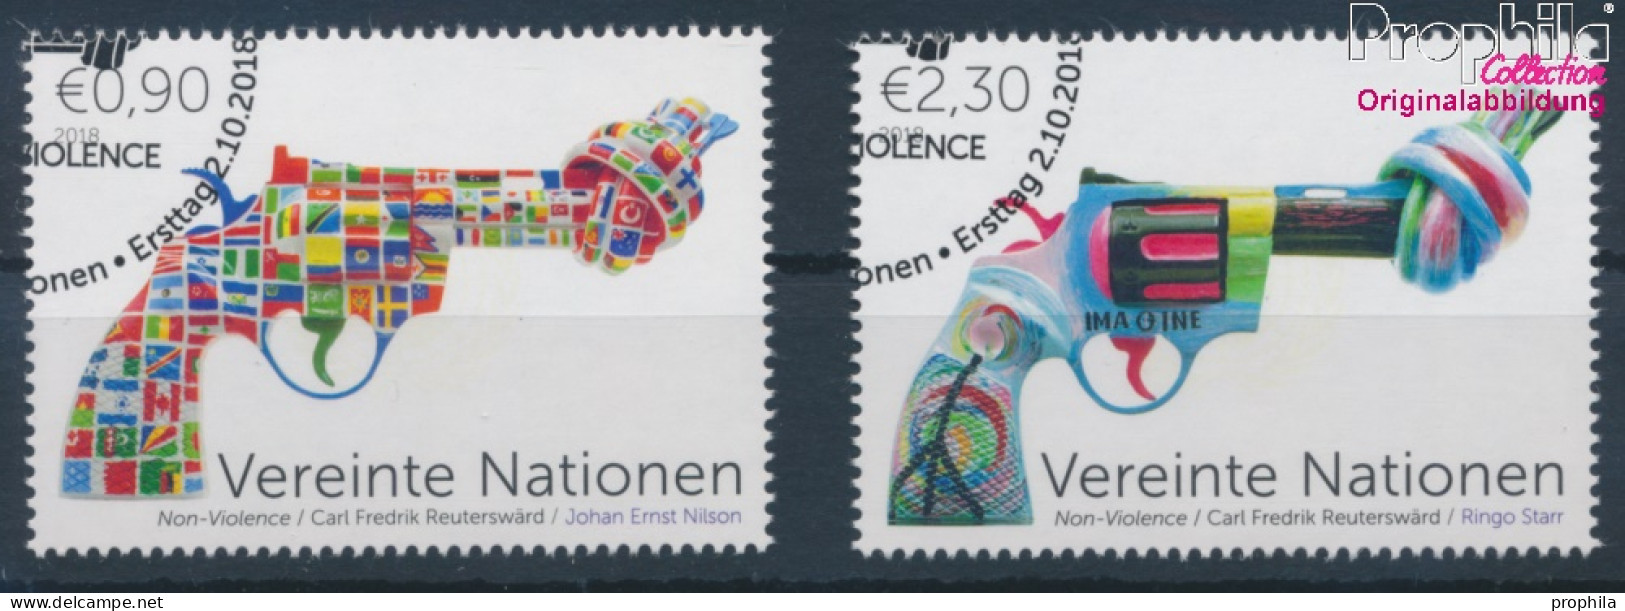 UNO - Wien 1041-1042 (kompl.Ausg.) Gestempelt 2018 Non Violence Project (10216424 - Used Stamps